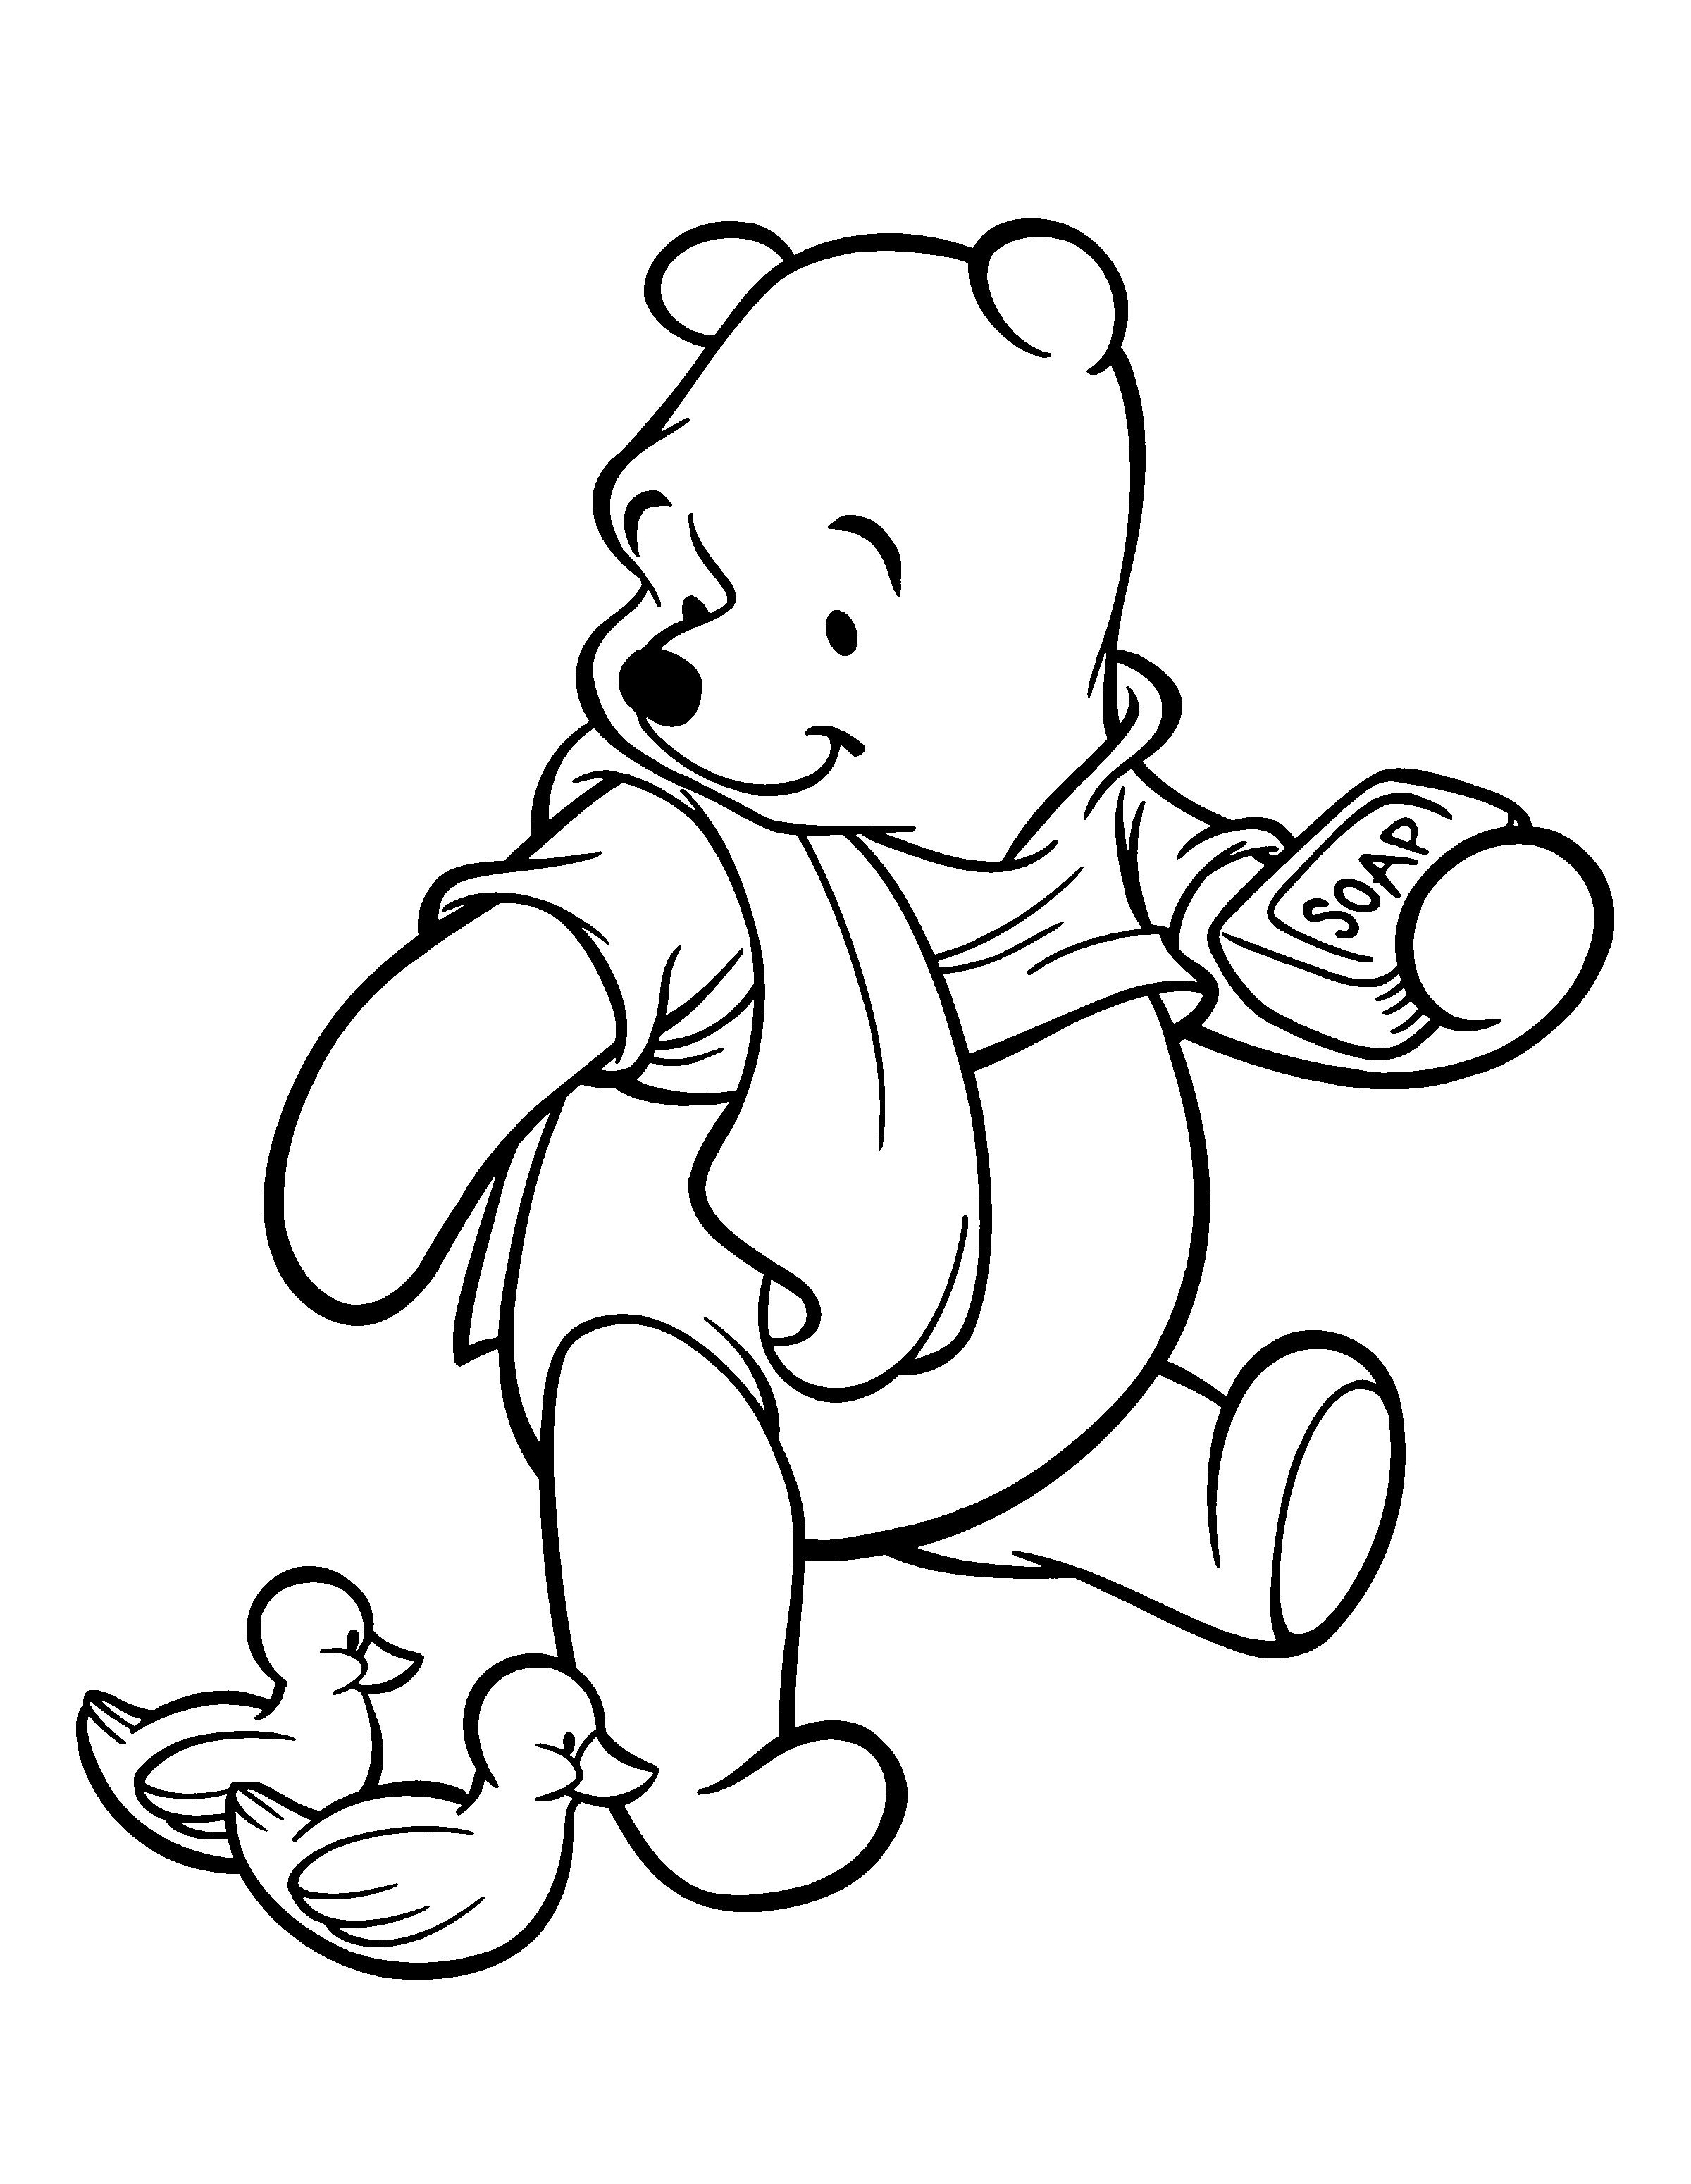 Winnie The Pooh Coloring Pages (3) - Coloring Kids